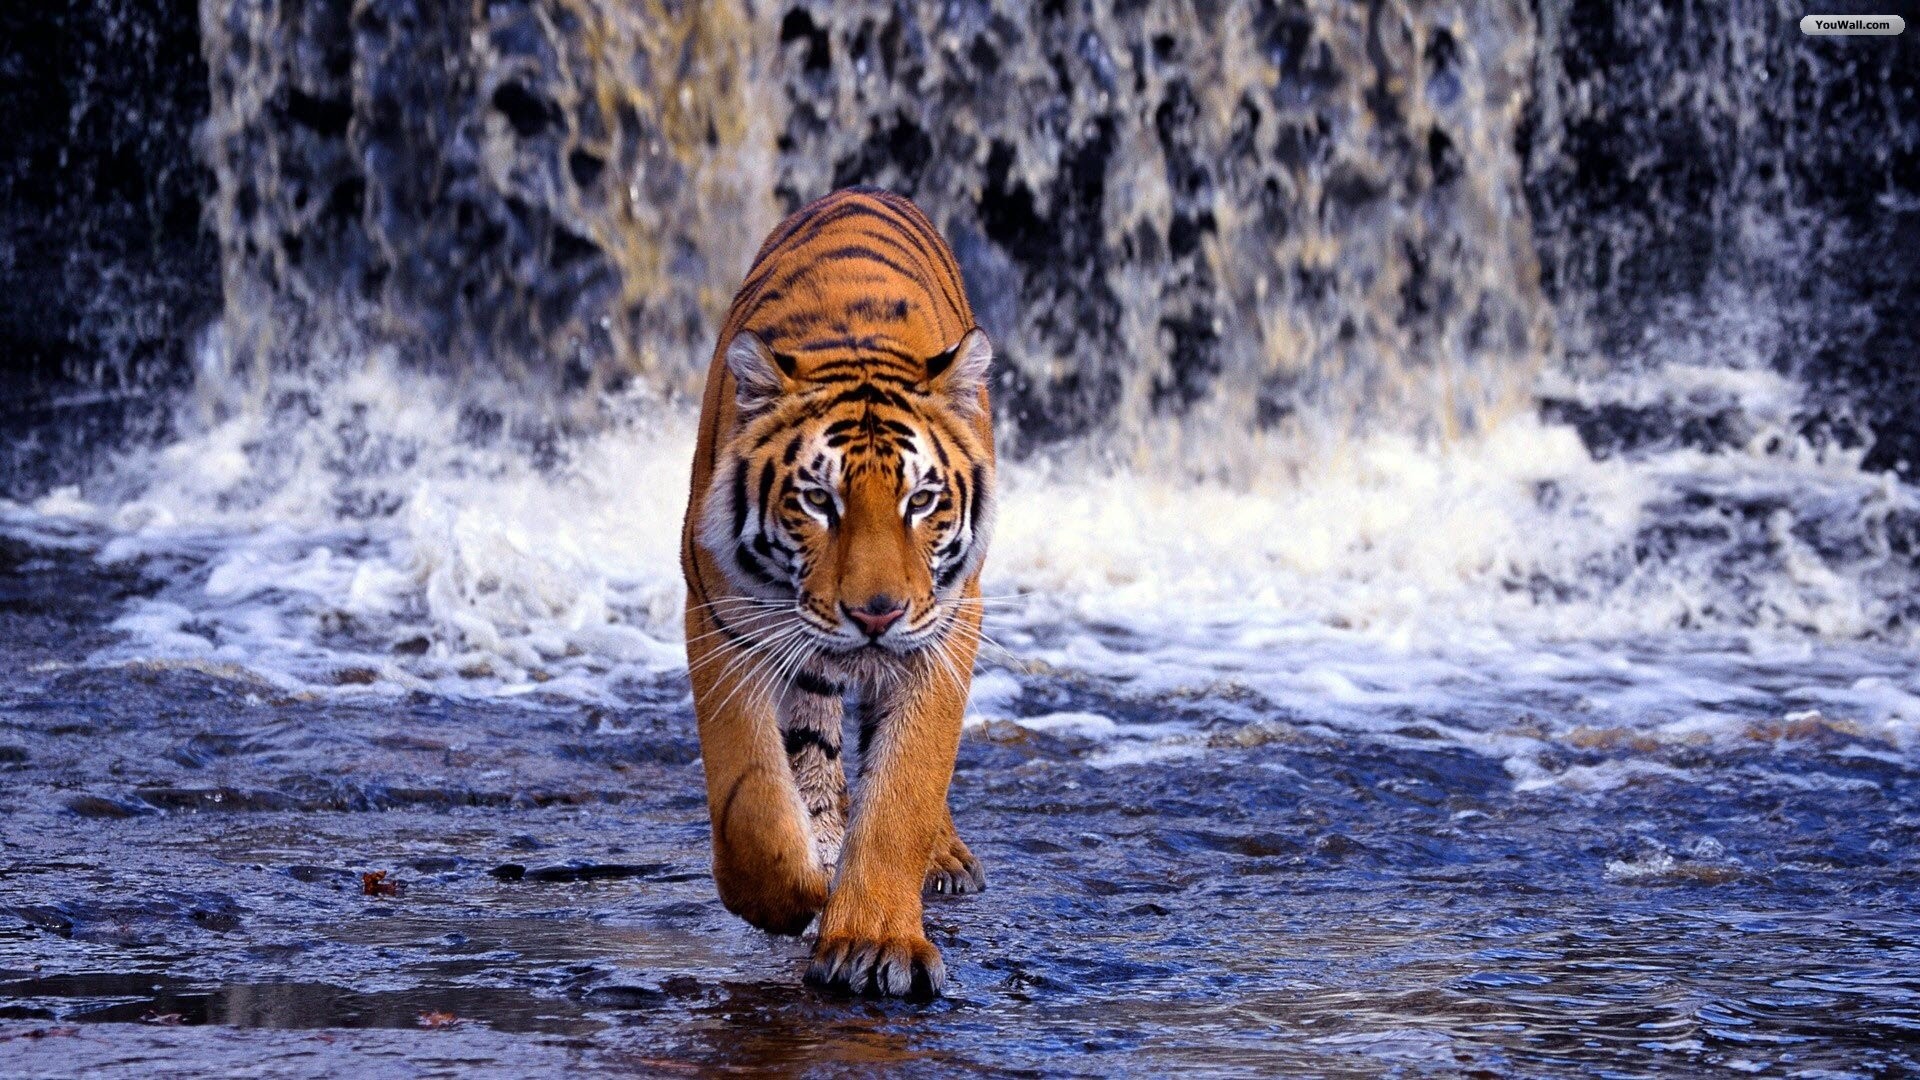 1920x1080 Tiger and Waterfall Wallpaper